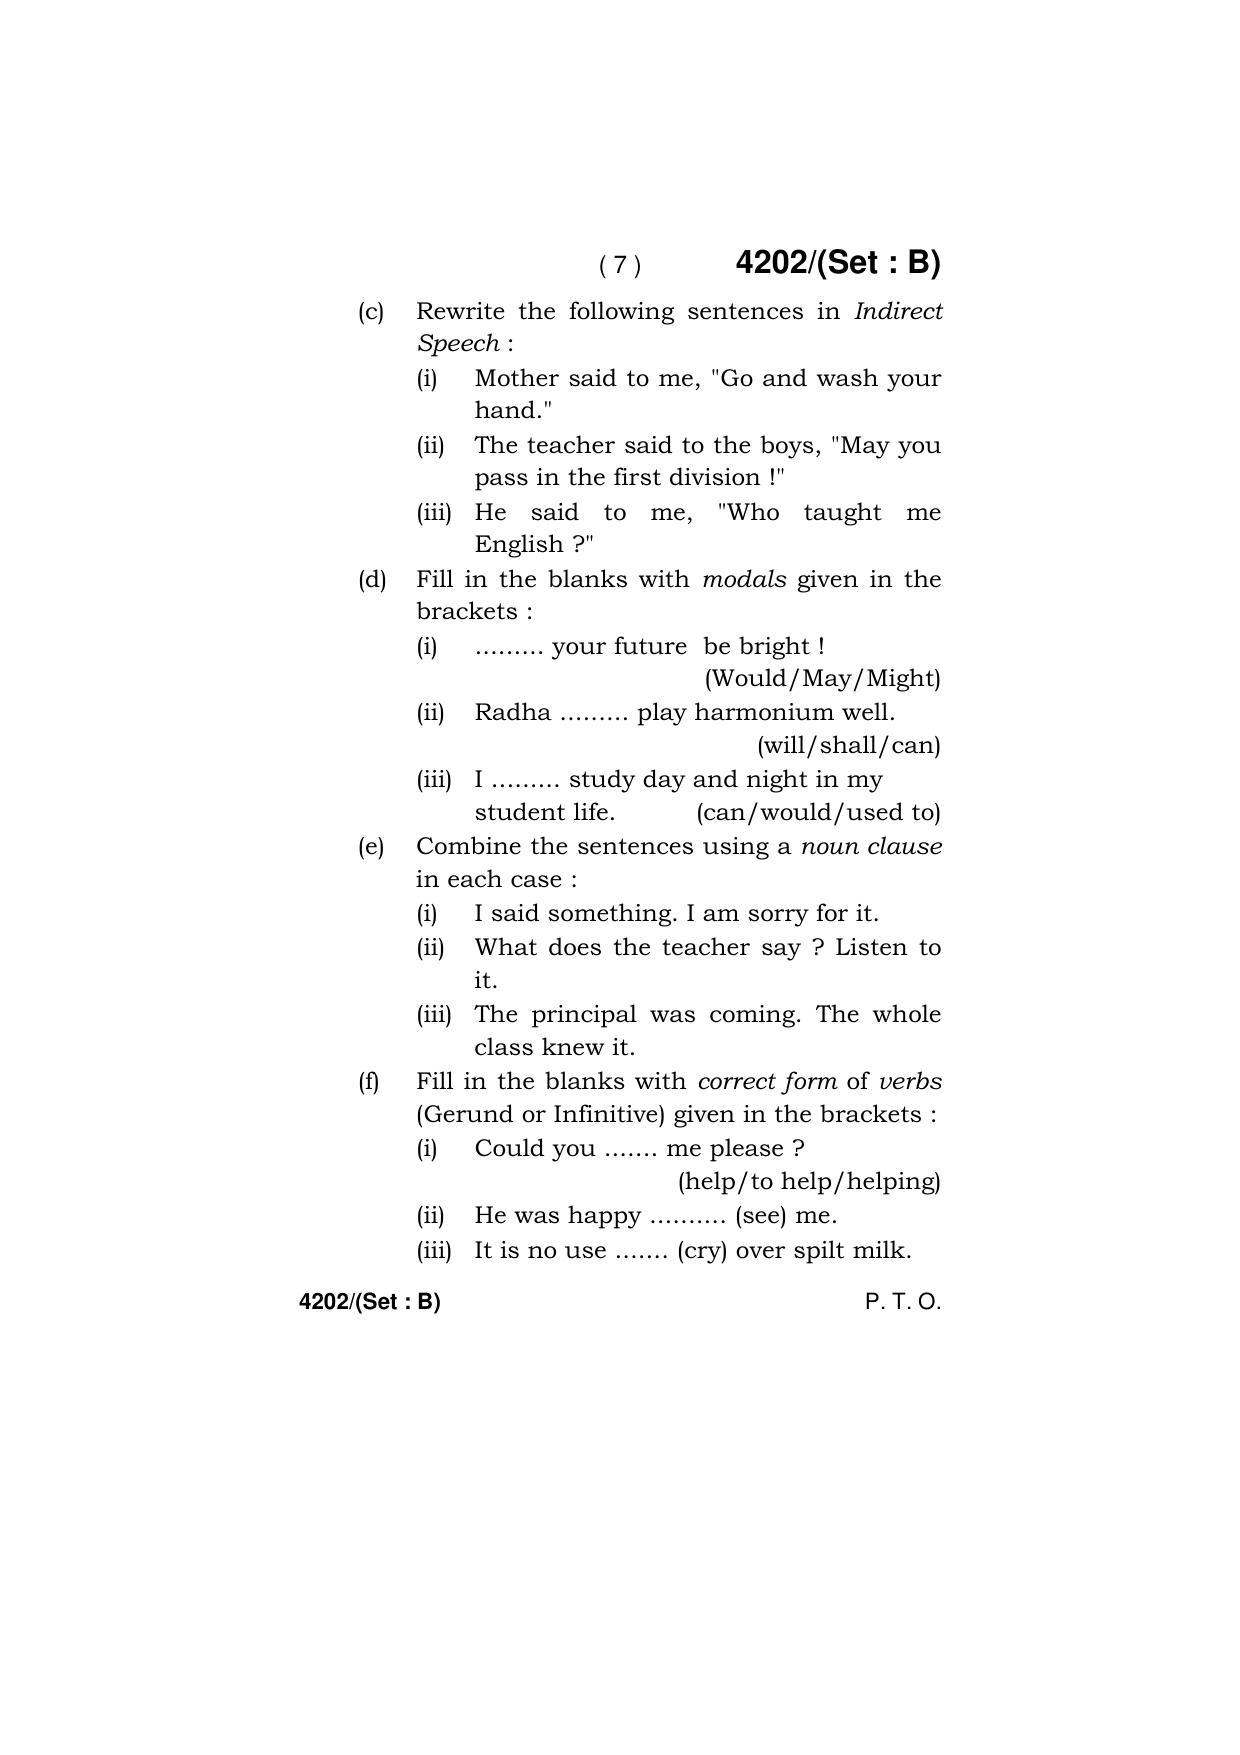 Haryana Board HBSE Class 10 English (All Set) 2019 Question Paper - Page 23